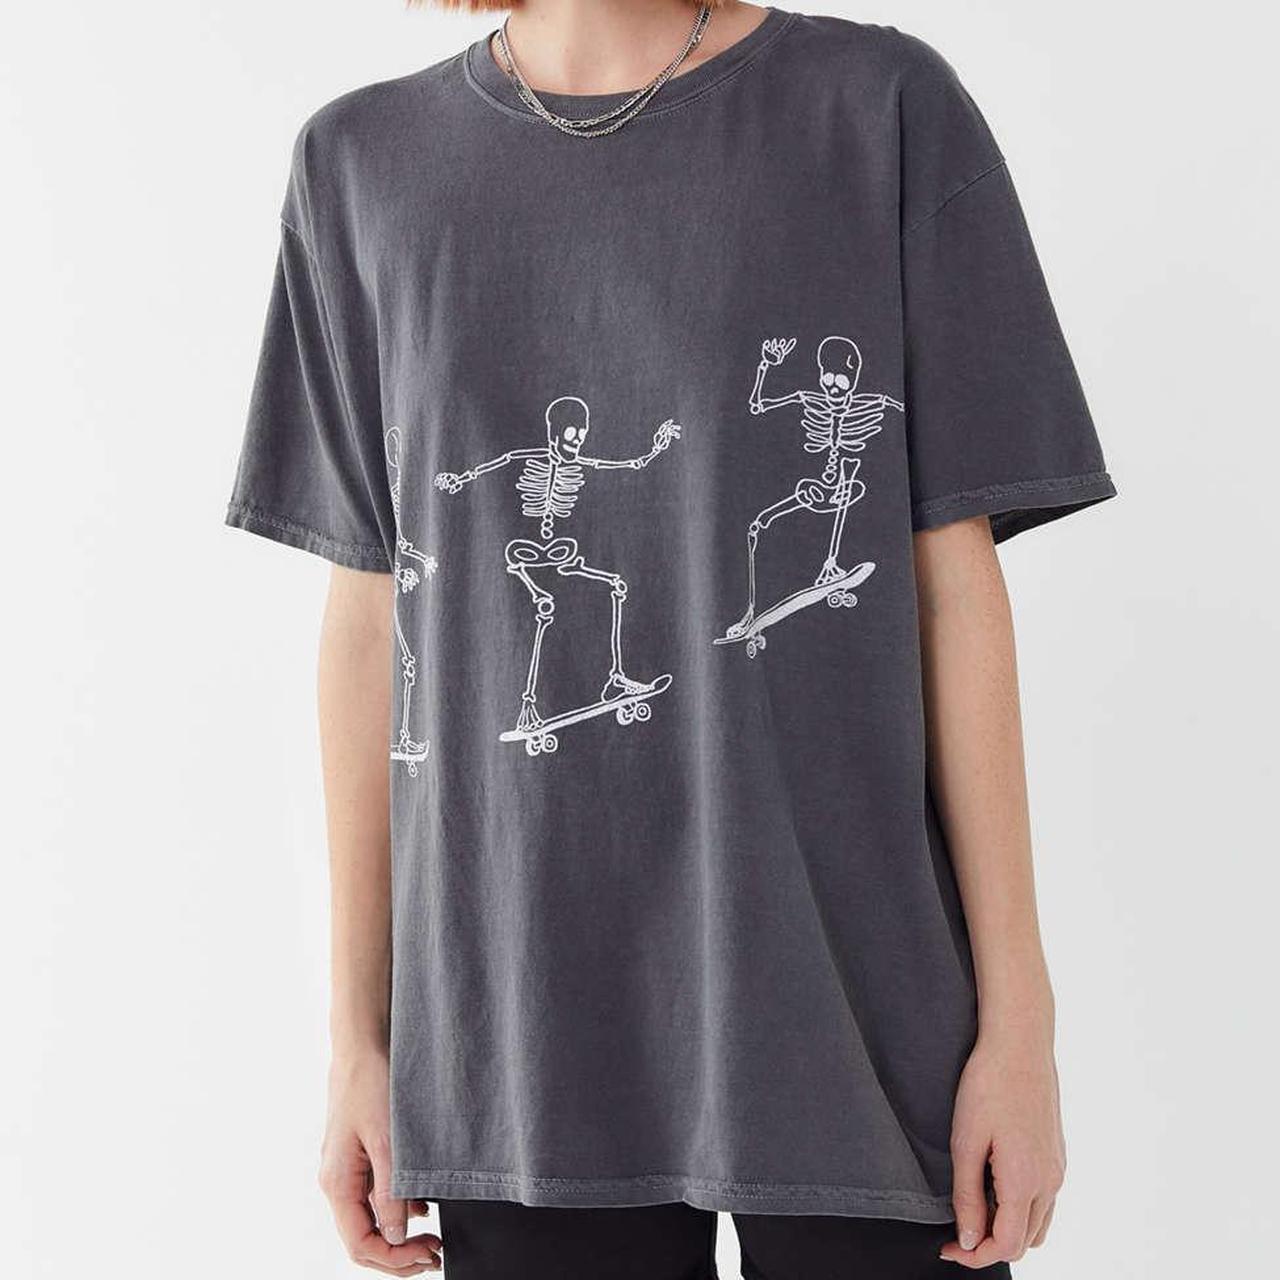 Urban Outfitters Skeleton T Shirt Project Social T •... - Depop